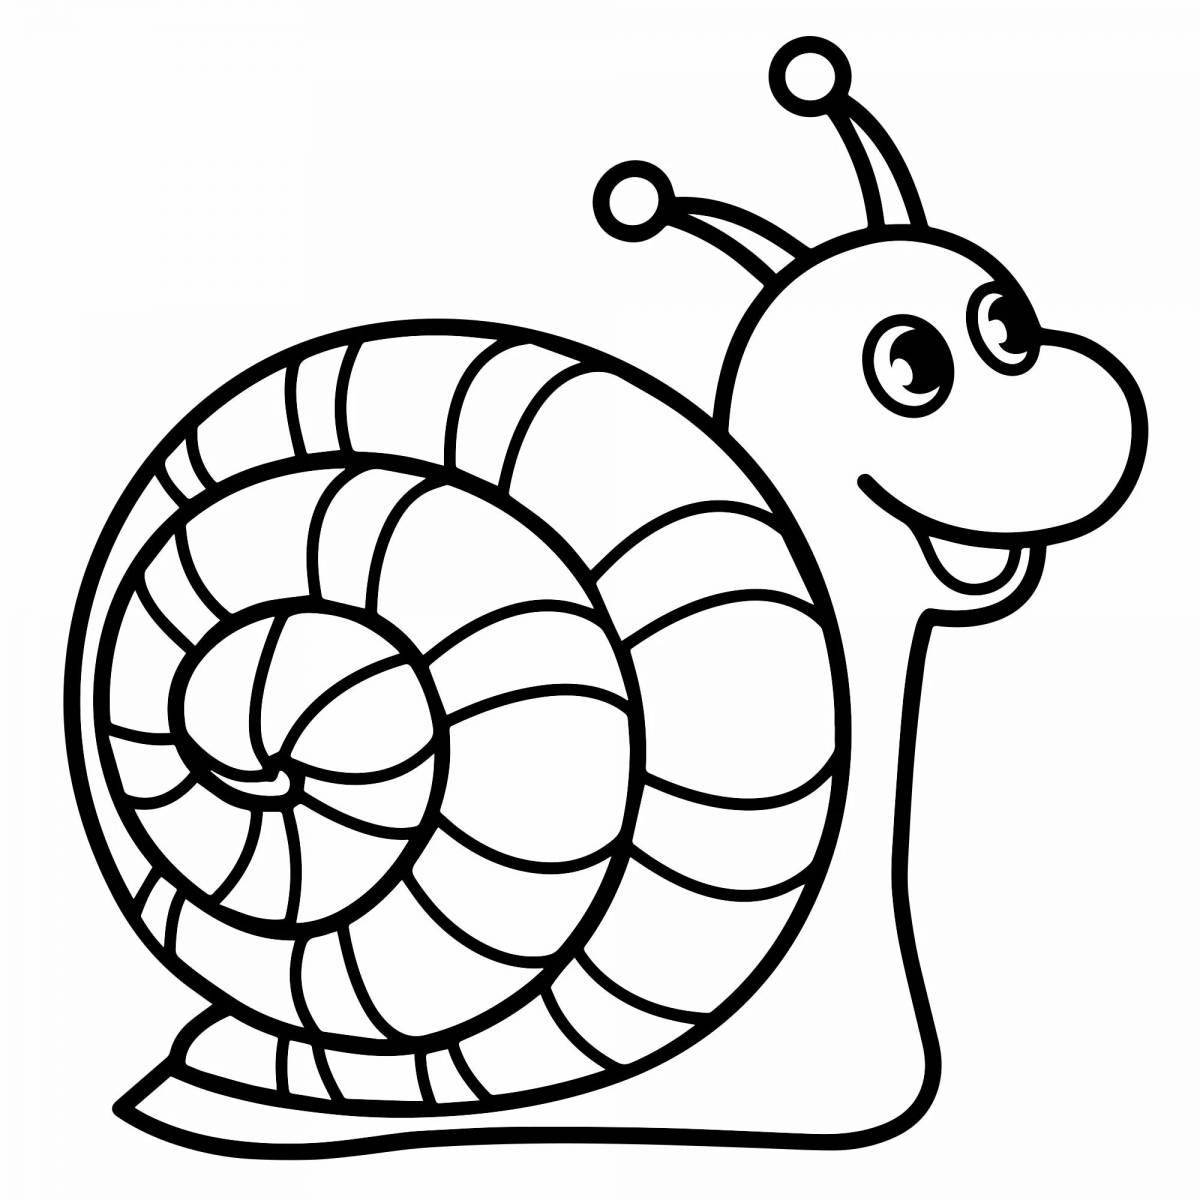 Funny snail drawing for kids